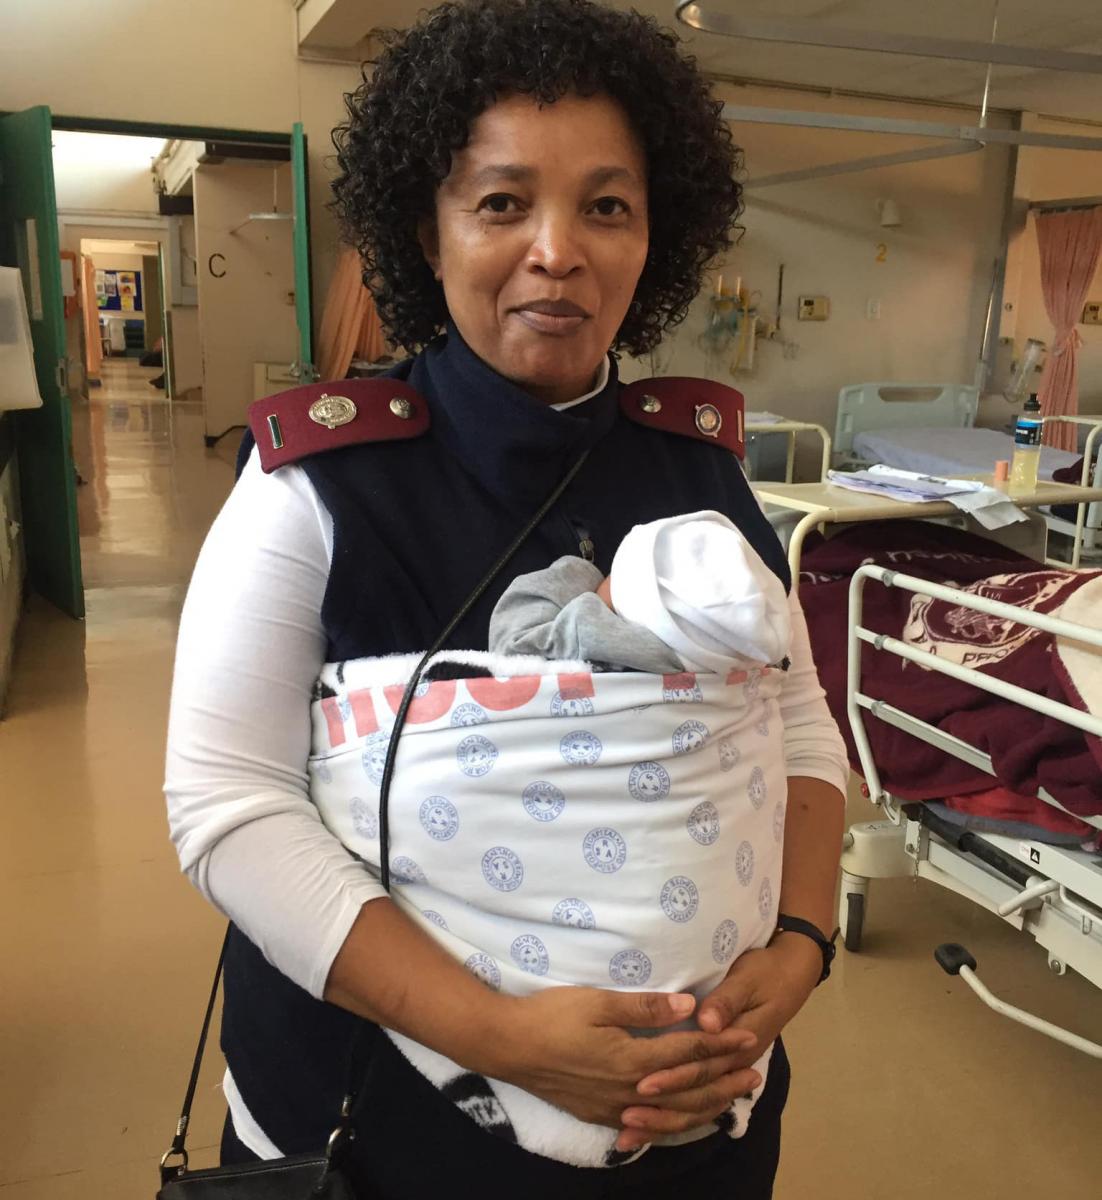 Professional Nurse Nomalungelo Mavimbela who works at Pholosong Hospital received praise from many South Africans for her service with a smile. She provided kangaroo care for a newborn in her ward.